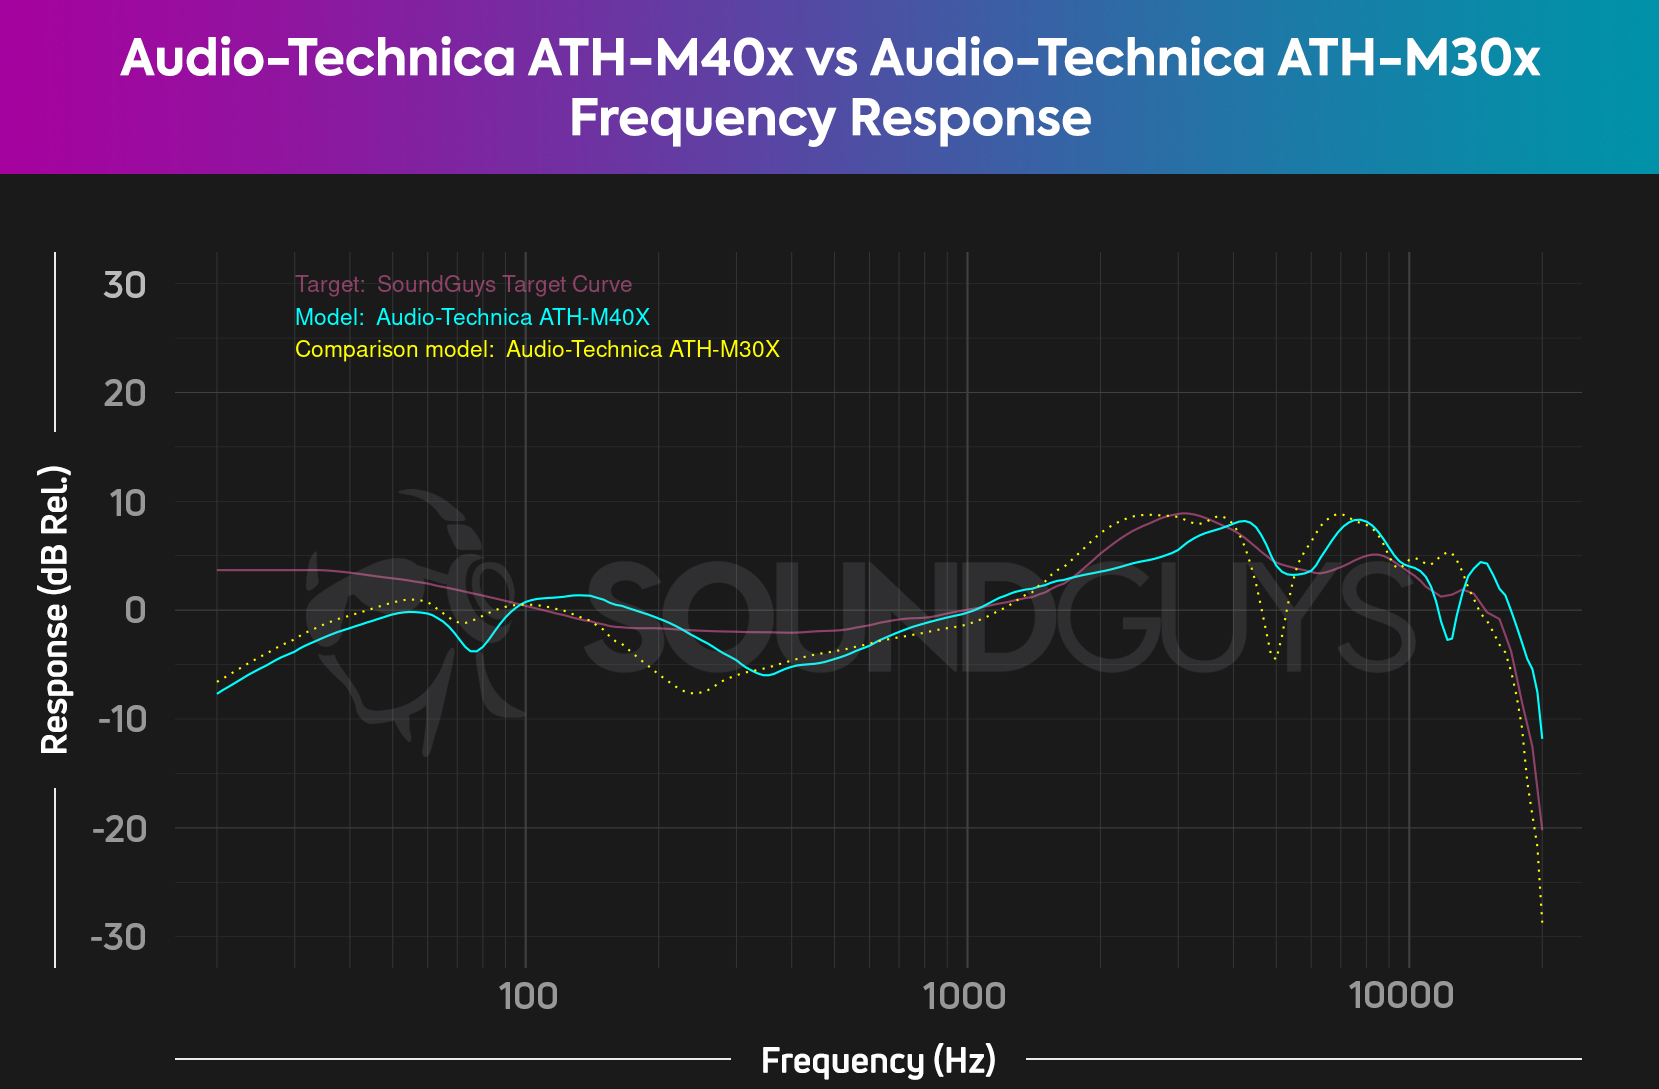 A chart compares the Audio-Technica ATH-M40x to the ATH-M30x.